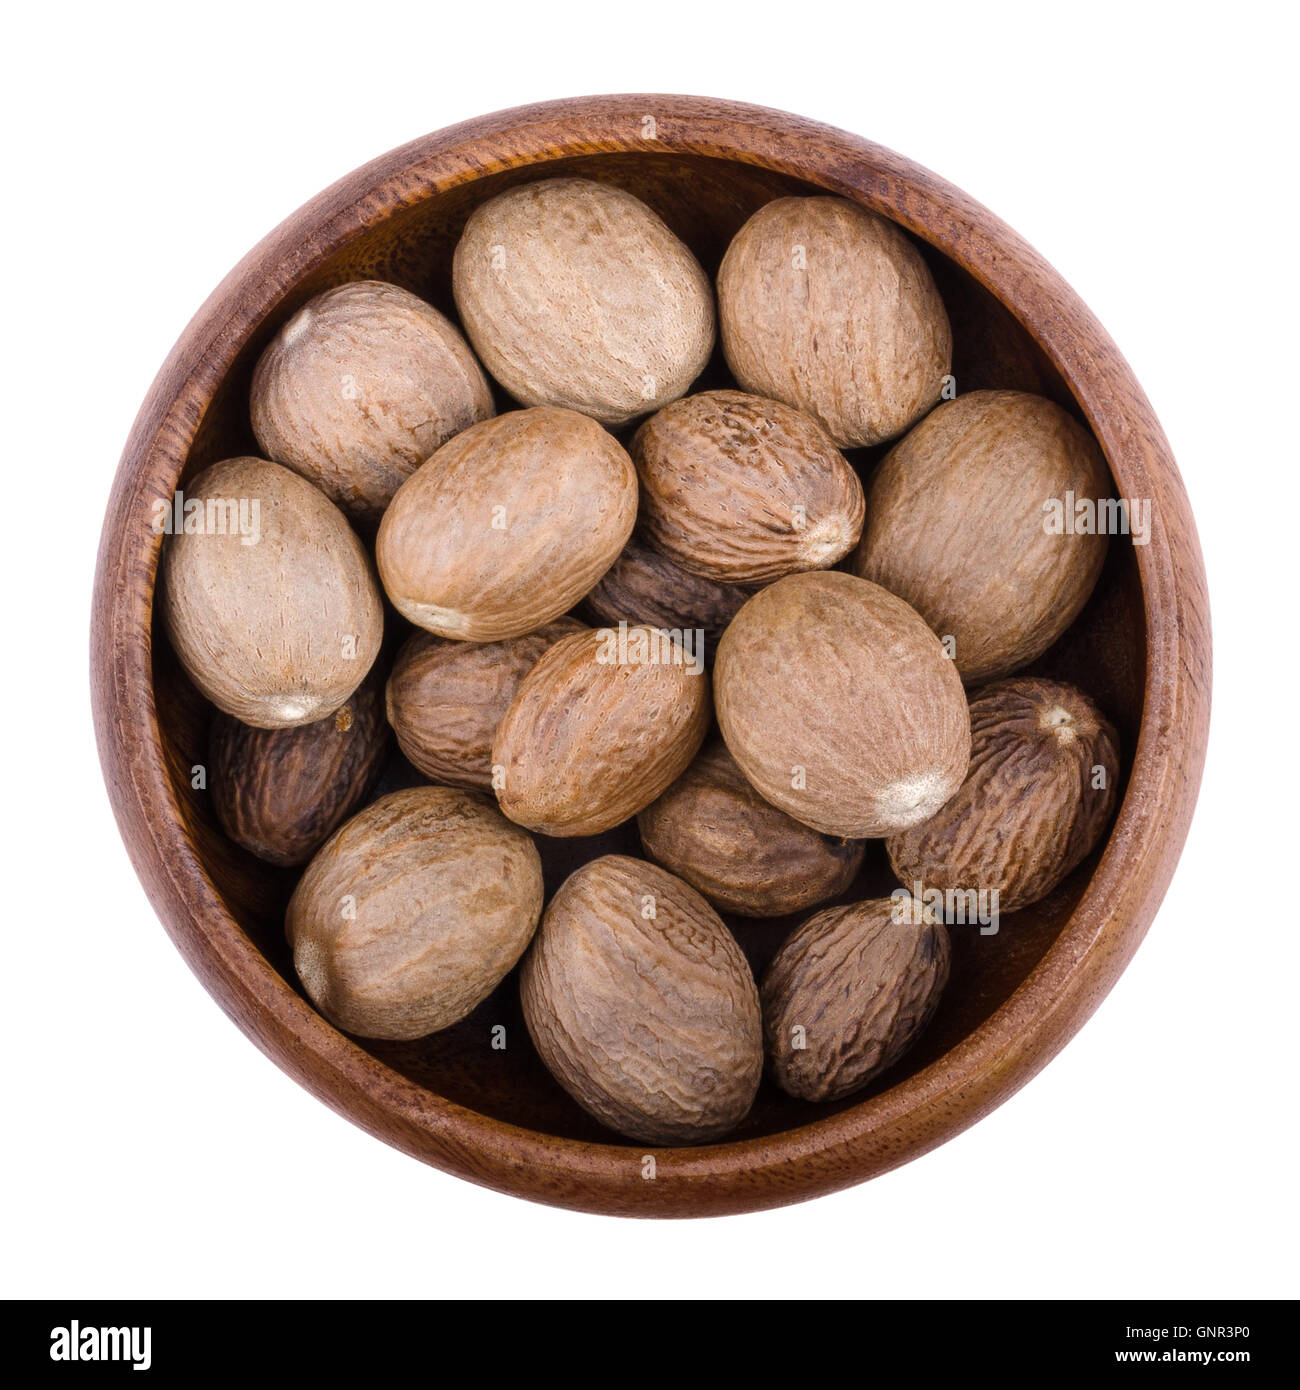 Nutmegs in a wooden bowl on white background. Myristica fragrans, also called pala, an edible brown and egg-shaped seed. Stock Photo